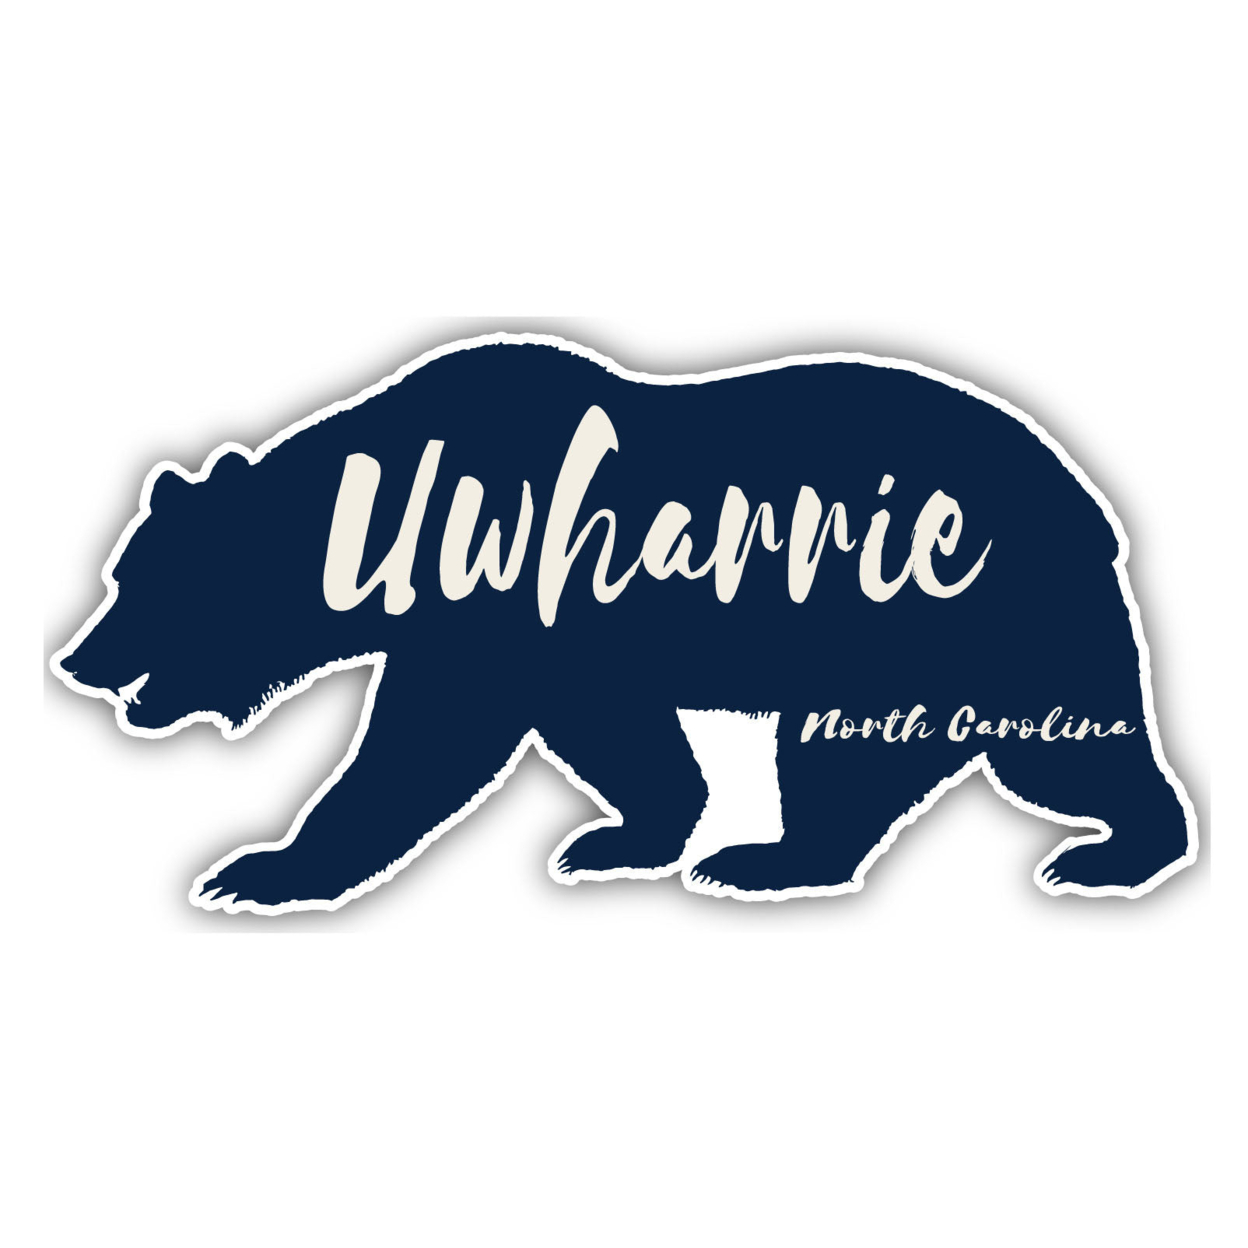 Uwharrie North Carolina Souvenir Decorative Stickers (Choose Theme And Size) - Single Unit, 2-Inch, Great Outdoors